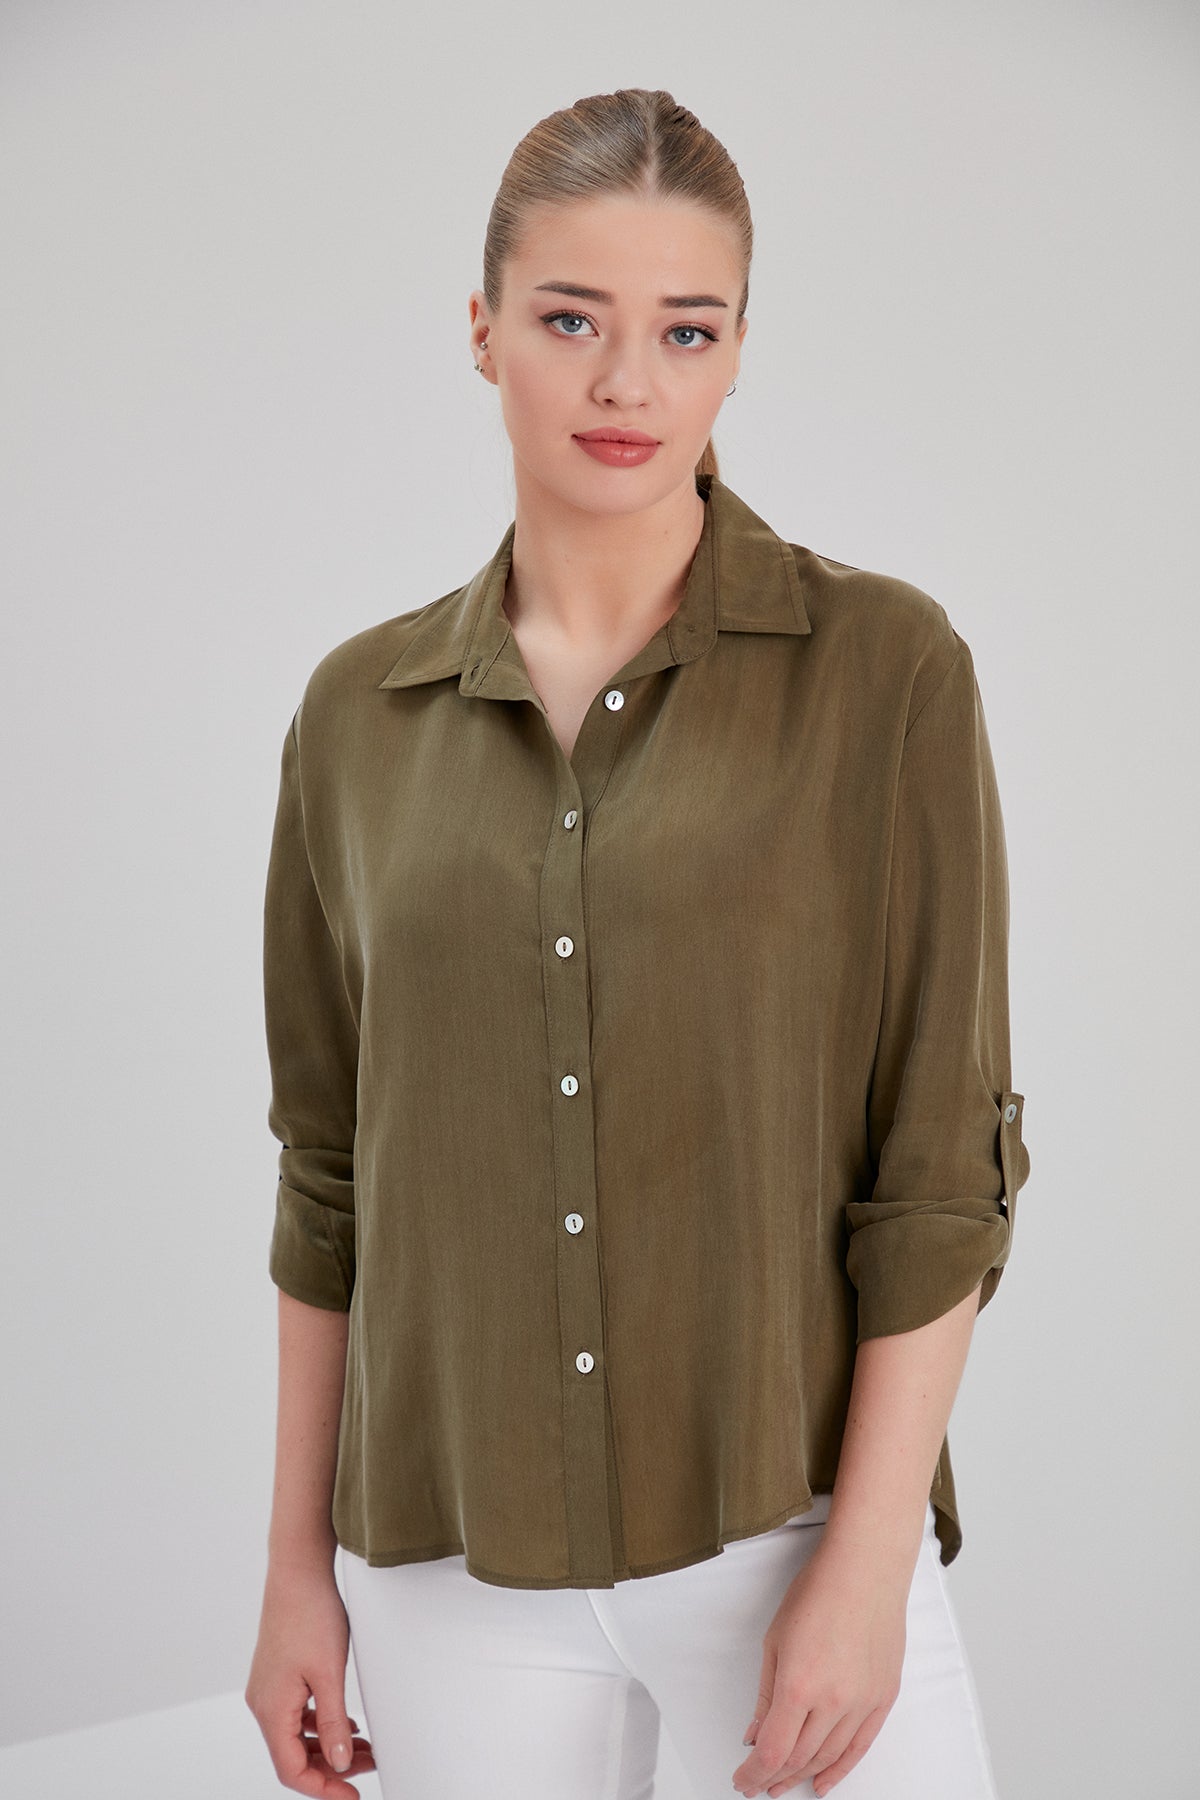 khaki-vegan-cupro-shirt-sustainable-recycled-buttons-tall-size